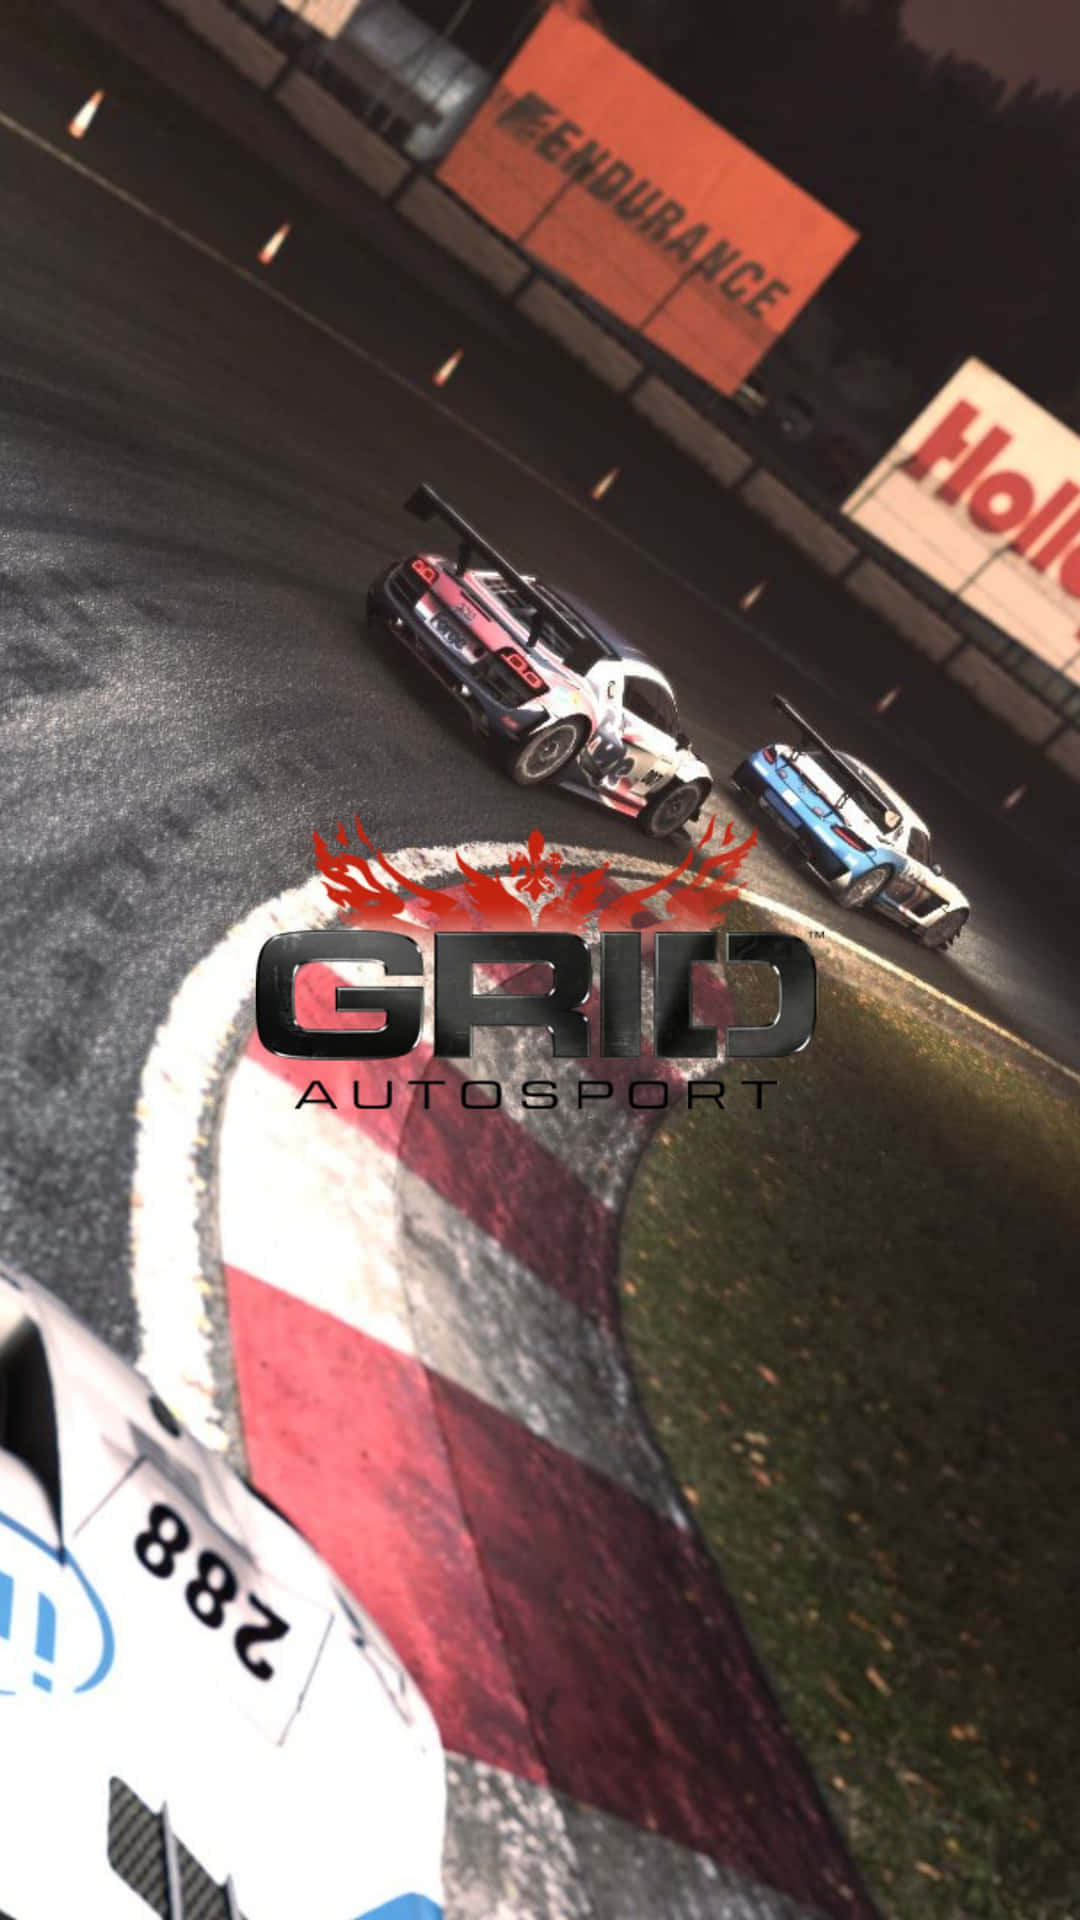 "Burning Out Your Tires in Grid Autosport"